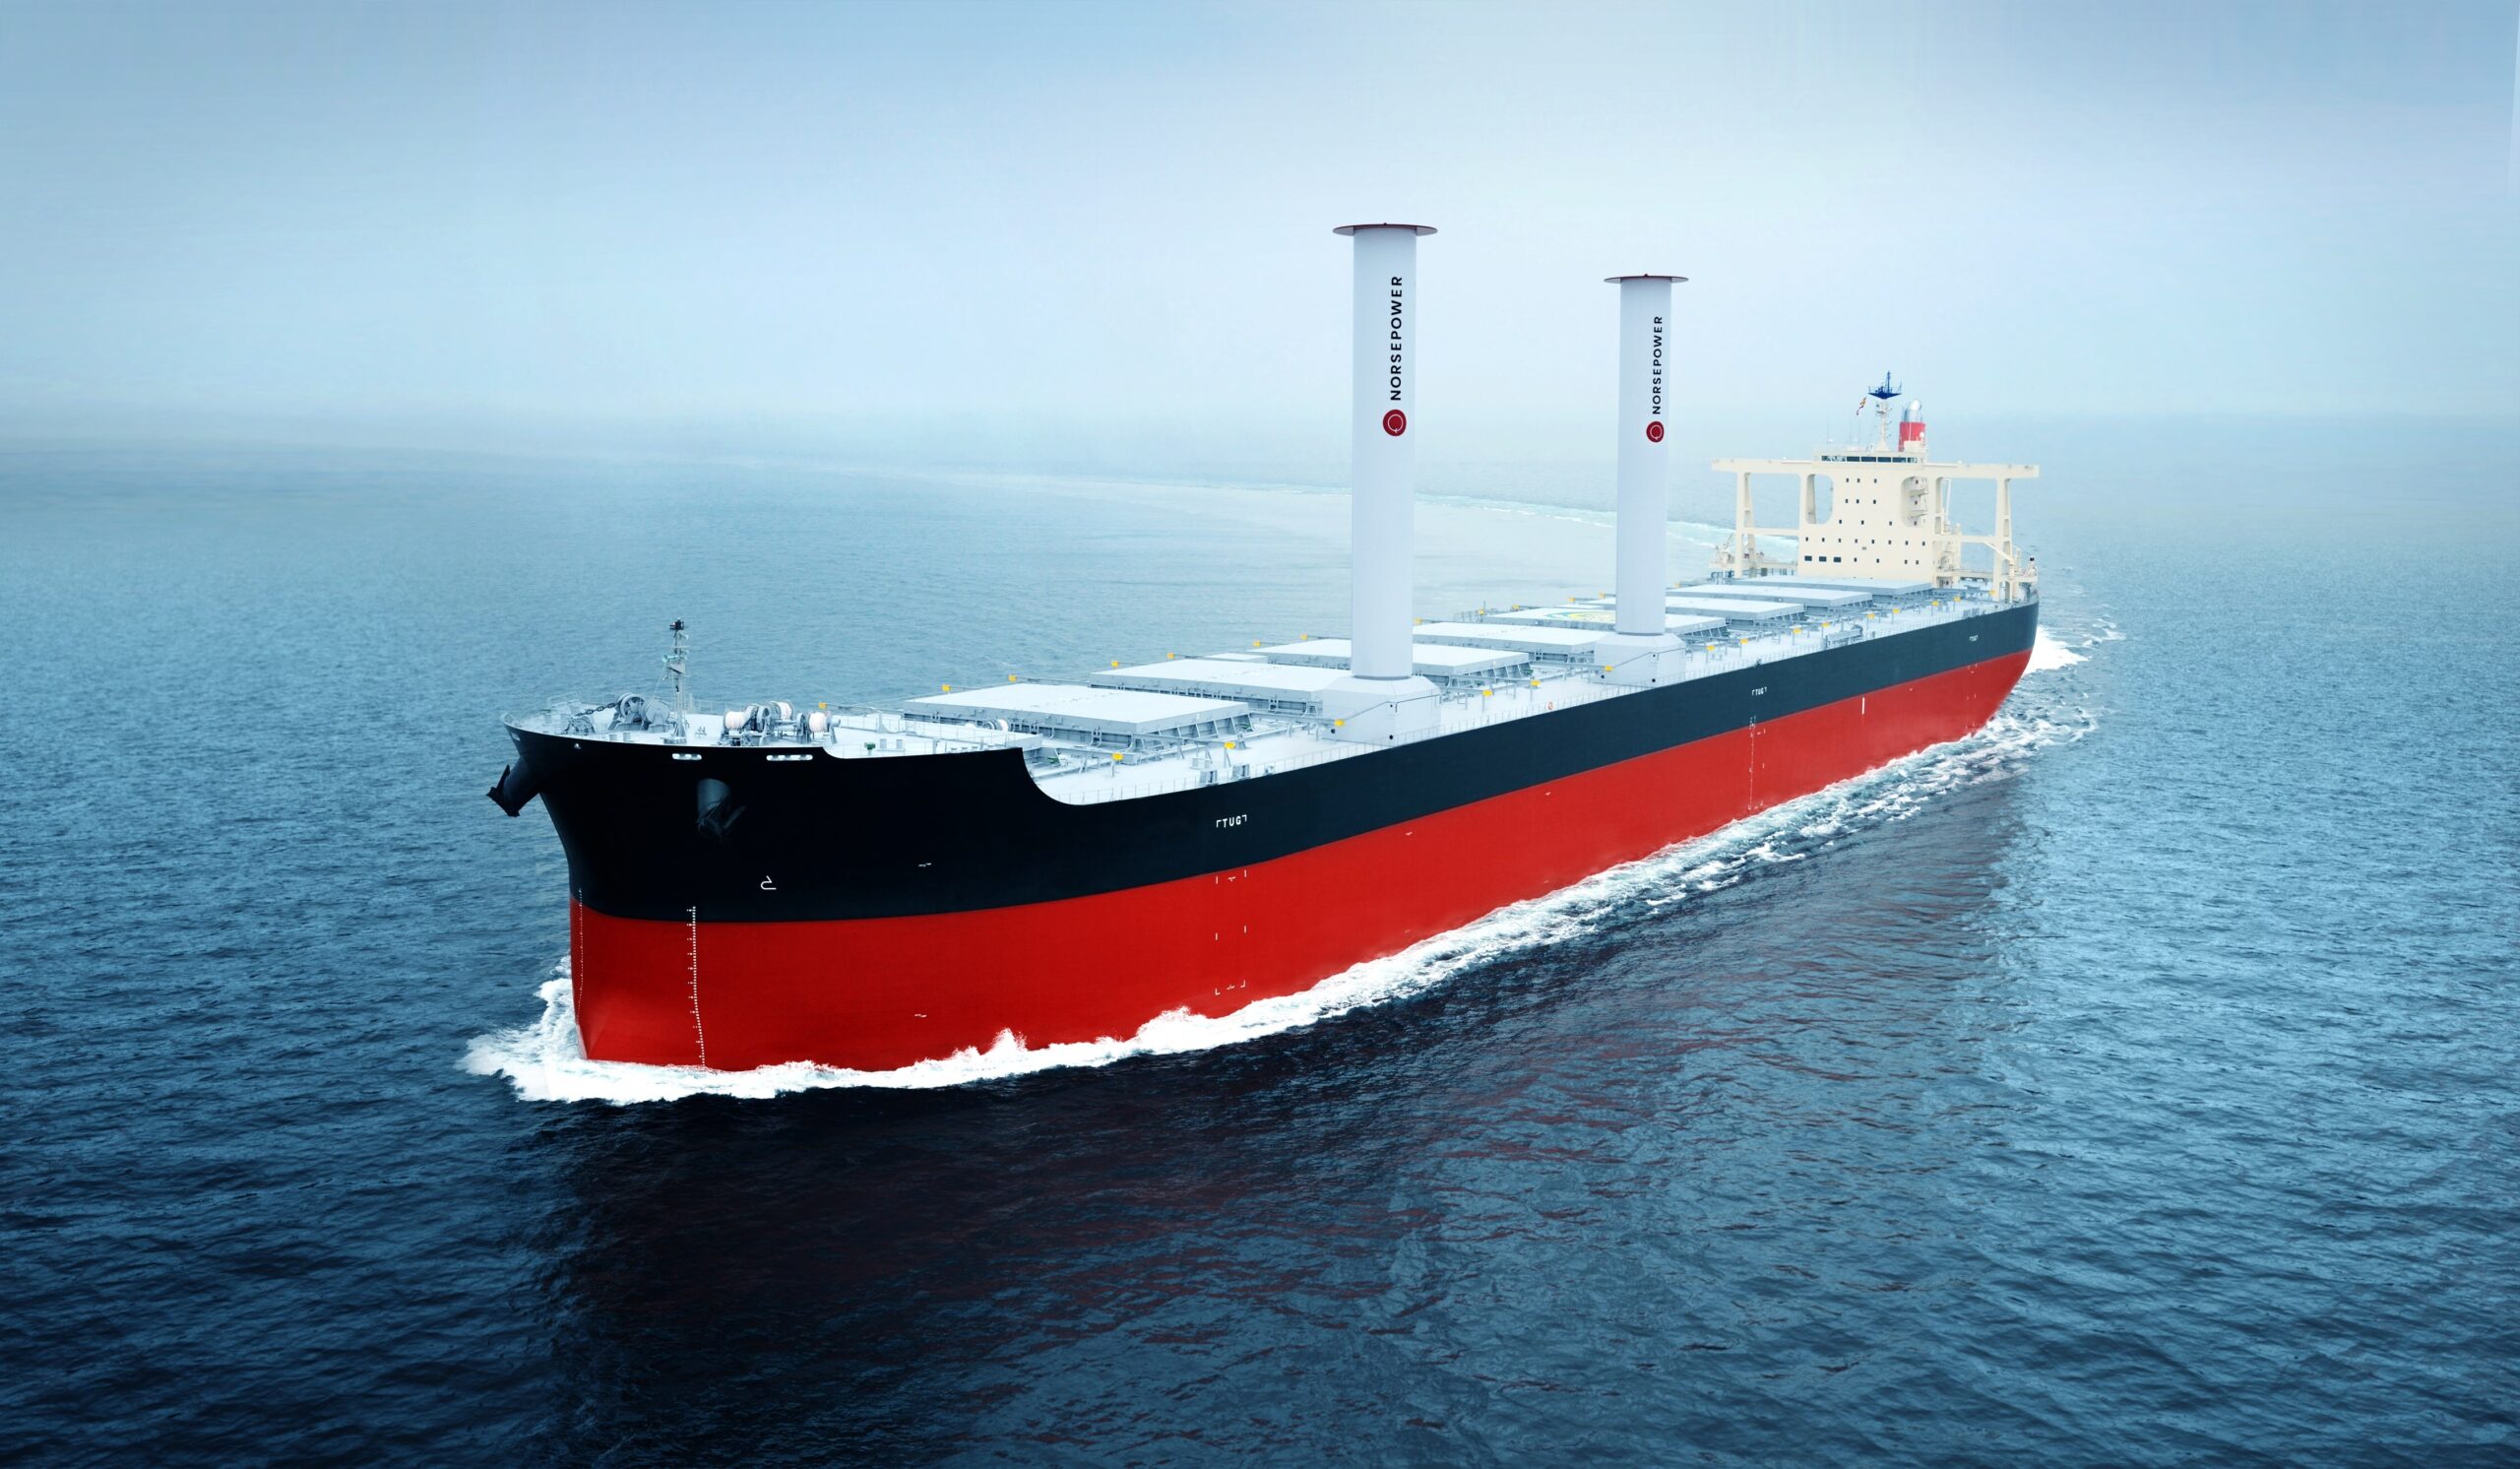 MOL and Vale to Install Rotor Sails on Capesize Bulk Carrier